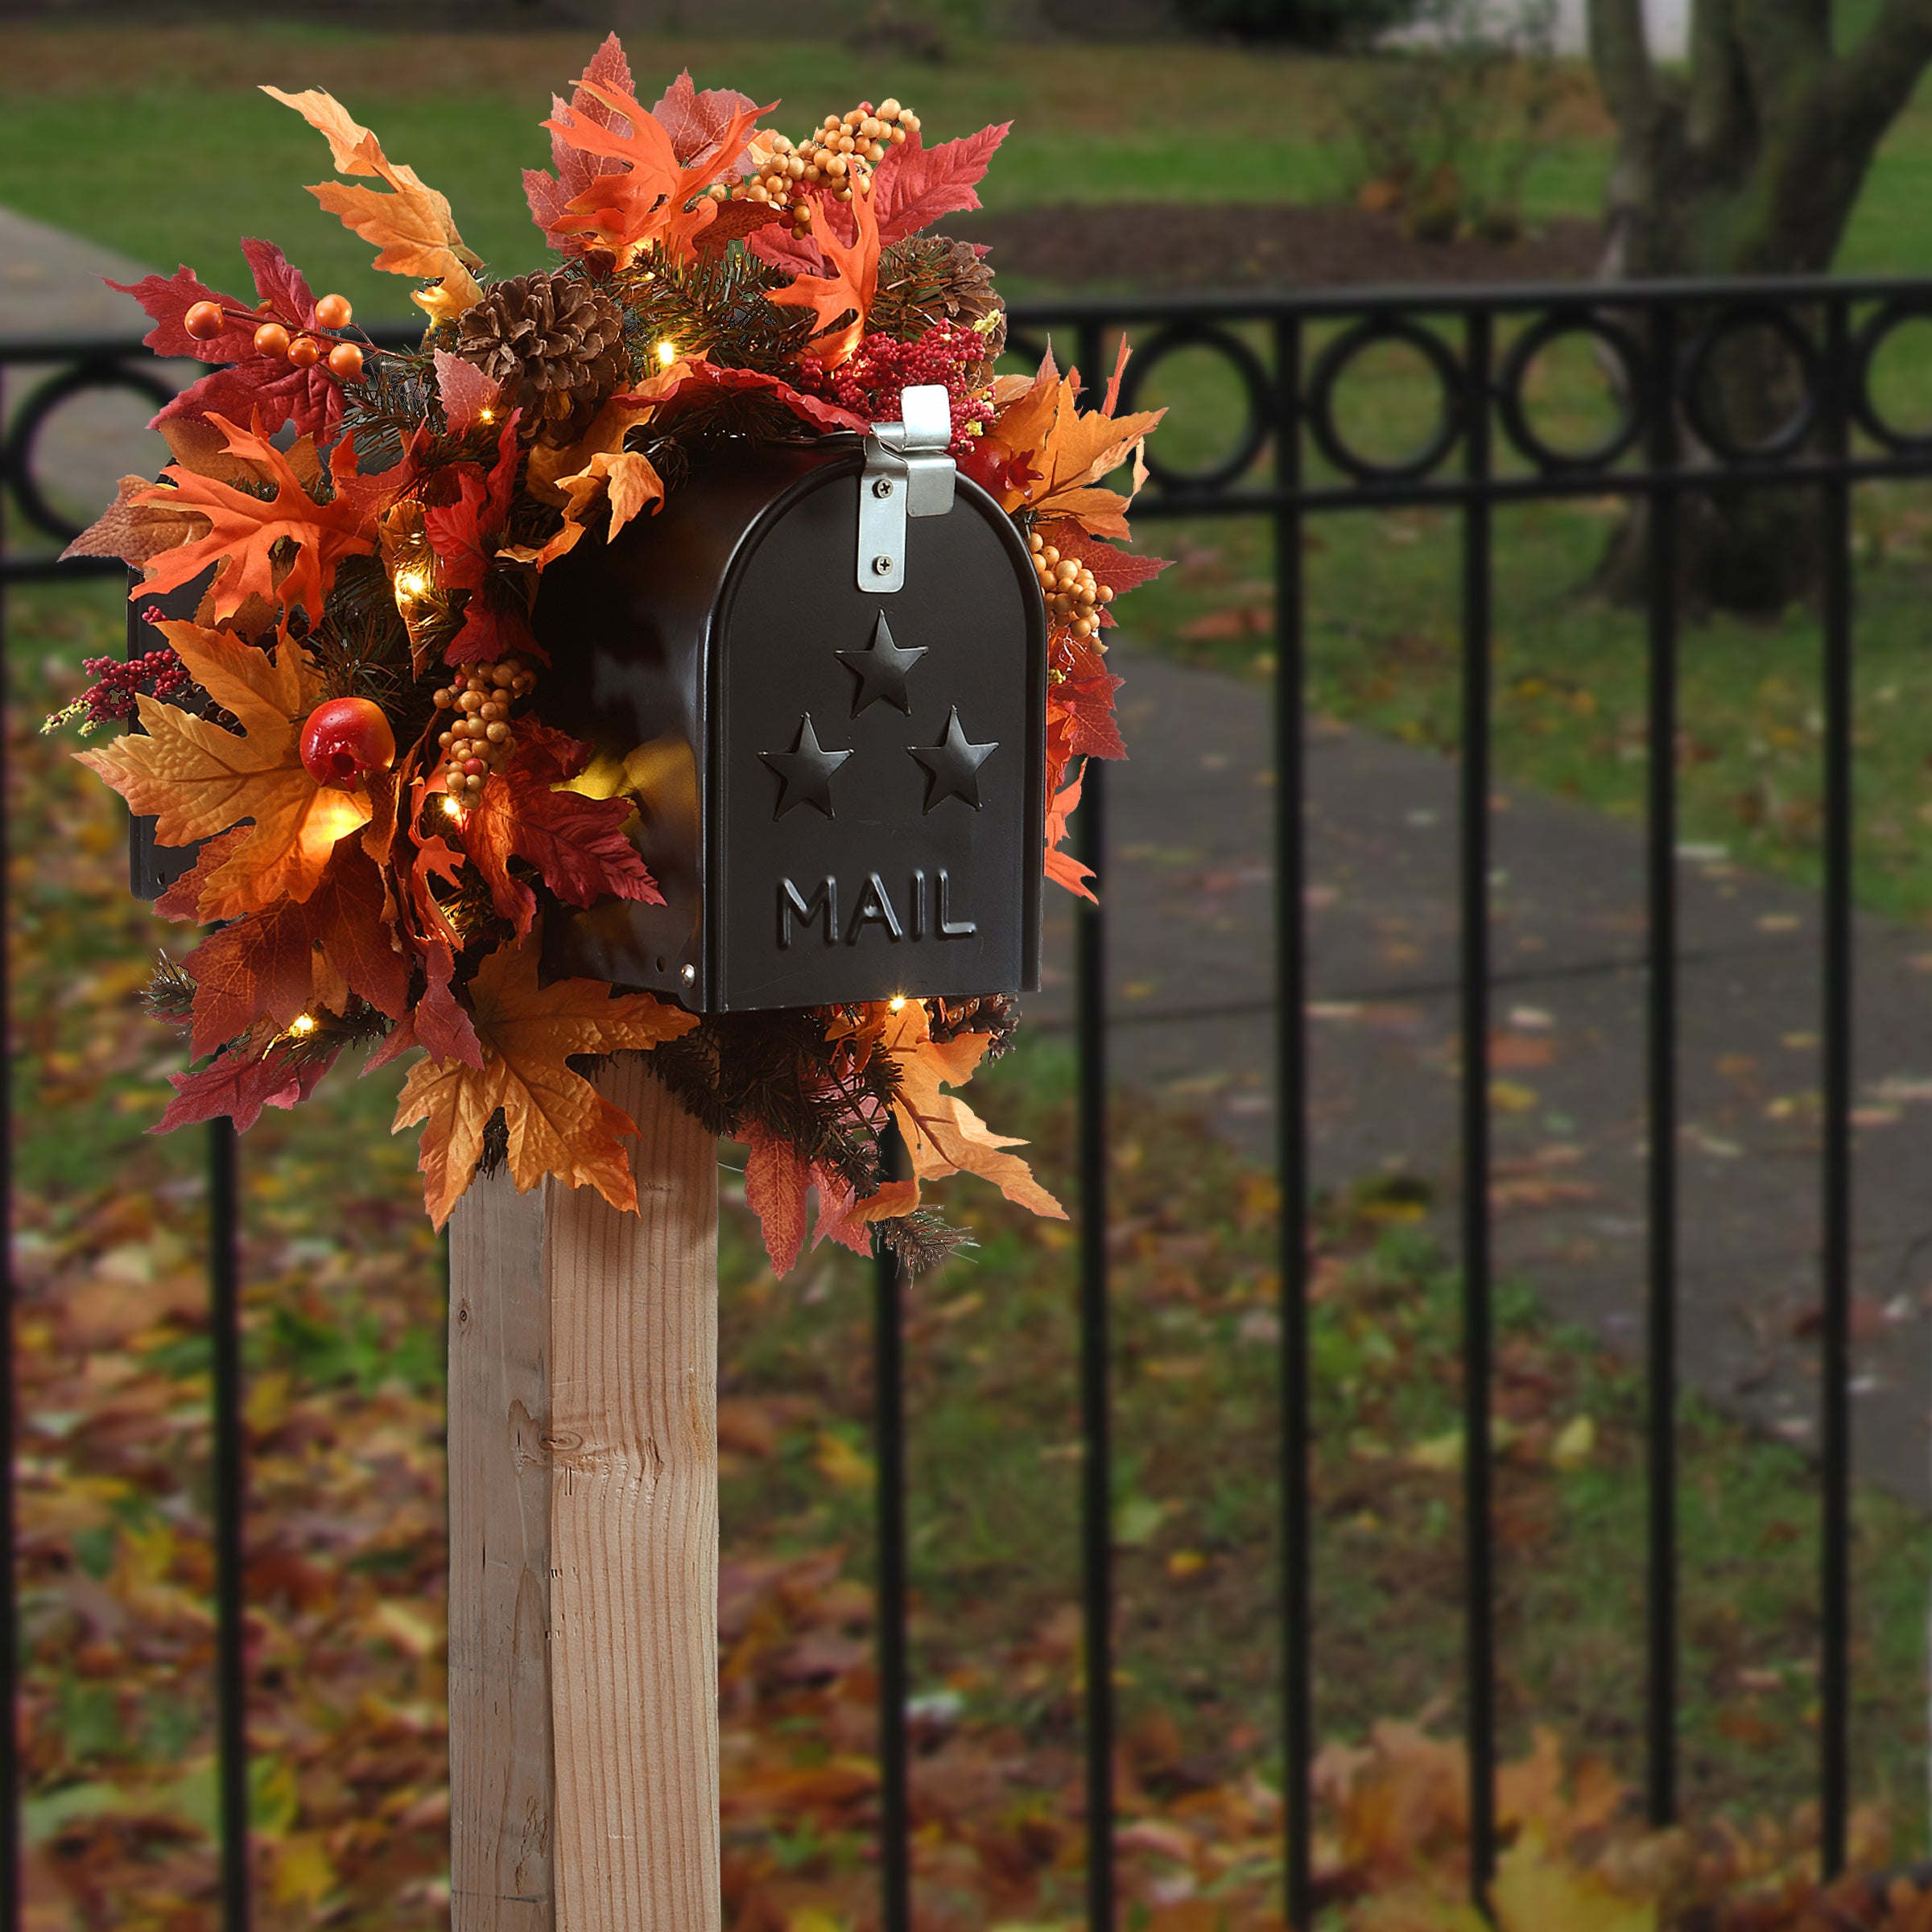 National Tree Company Pre-lit Harvest Mailbox Decoration, Decorated with Pinecones, Berry Clusters, Maple Leaves, LED Lights, Autumn Collection, 36 in